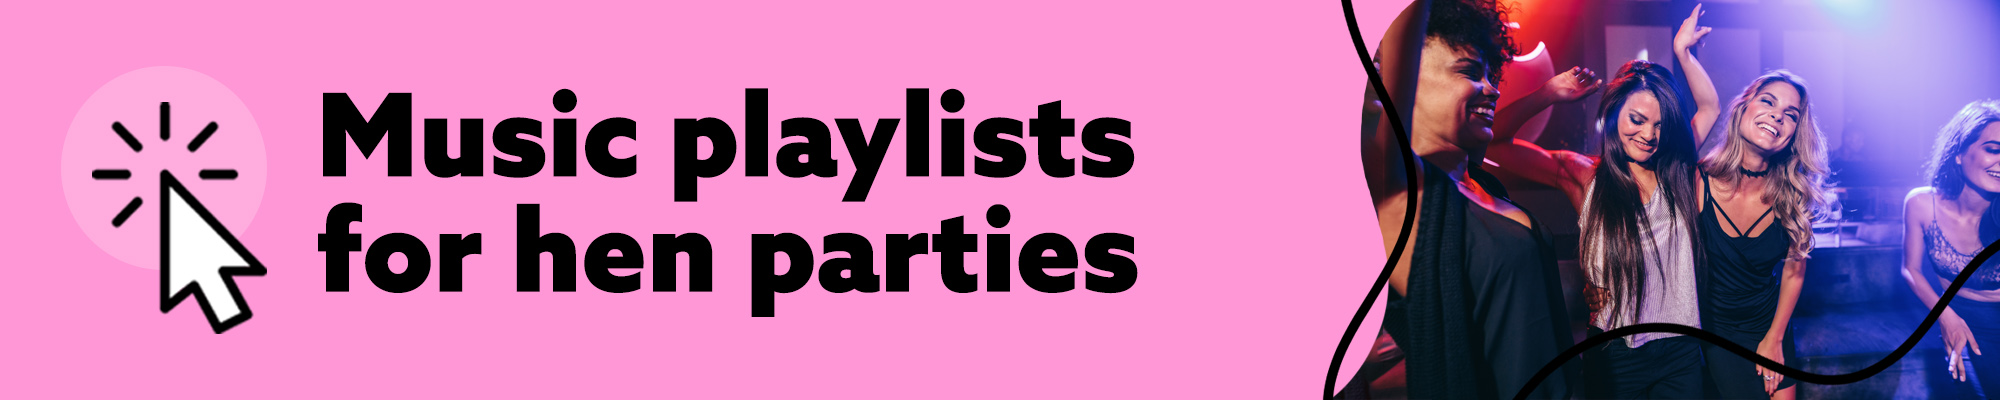 Music Playlists for Hen Parties